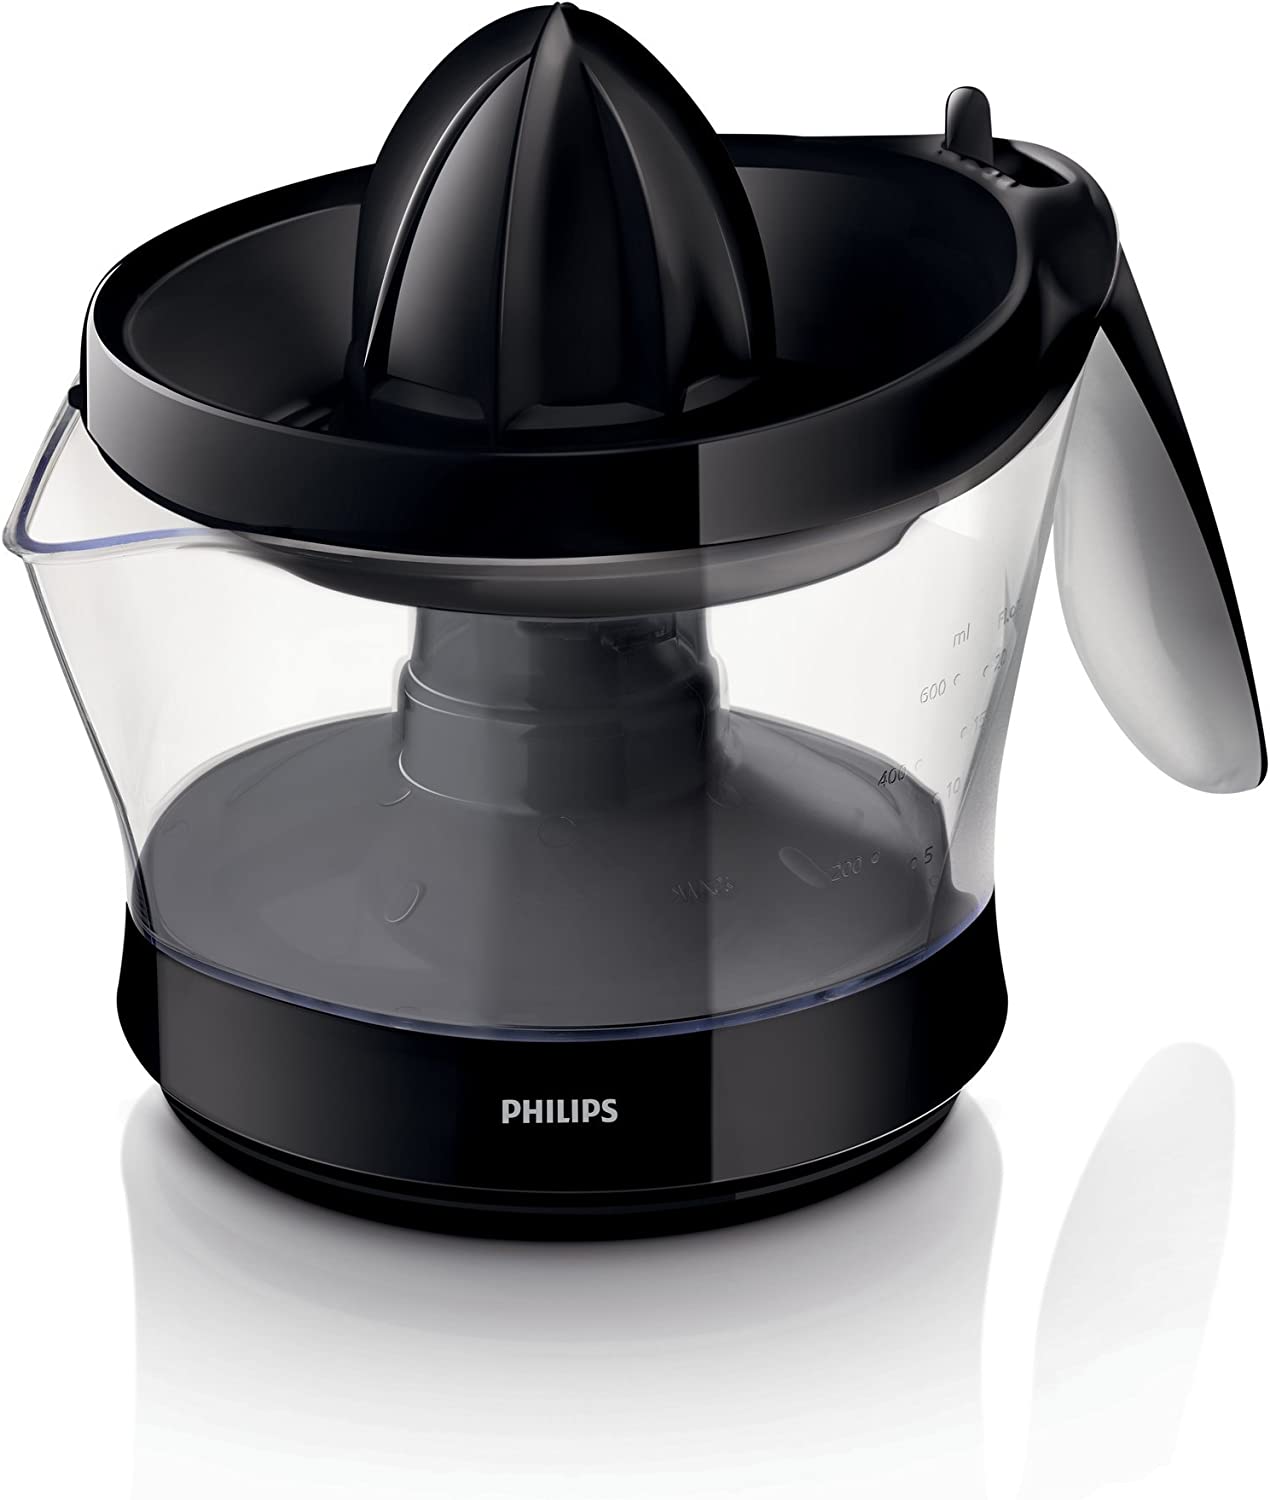 Philips Domestic Appliances Philips HR2744/90 Juicer with Adjustable Flesh Content. Capacity: 0.6L